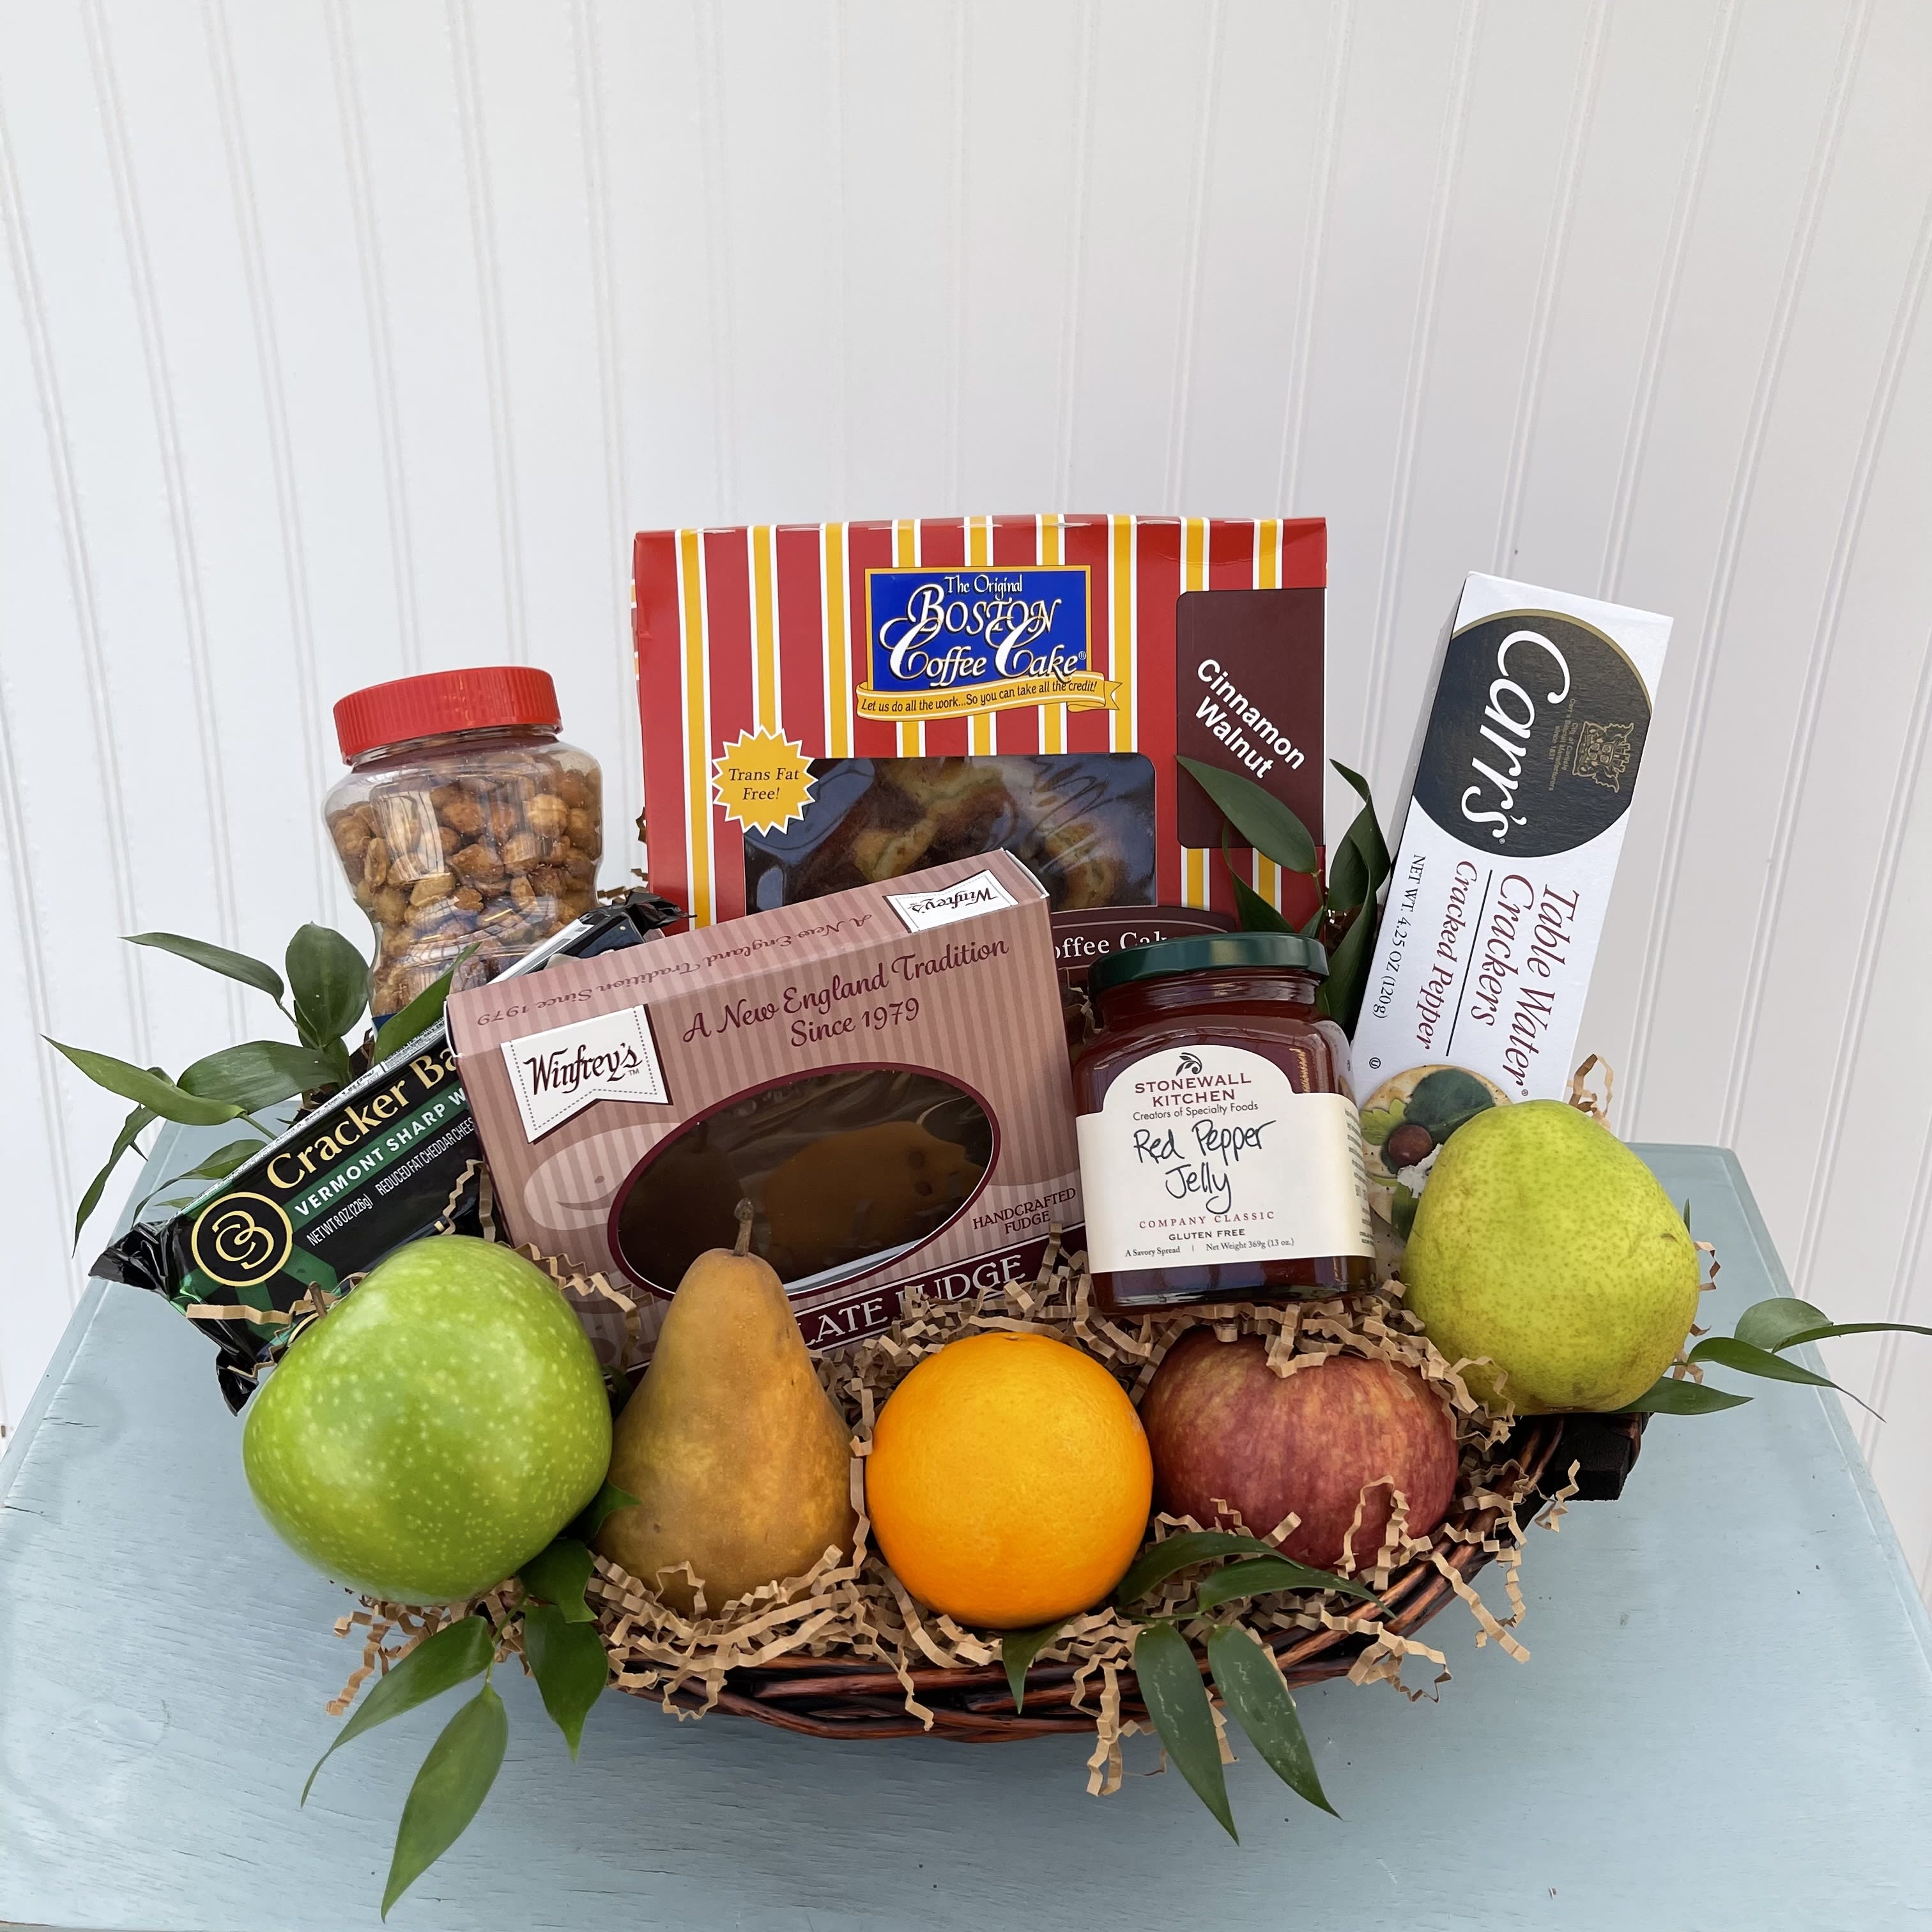 Fruit + Goodies  - Our hand-made baskets include an assortment of fresh fruit and  yummy goodie items from local favs including Winfrey's and Stonewall Kitchen. Each gift is unique and may vary slightly from image but will be great all the same!